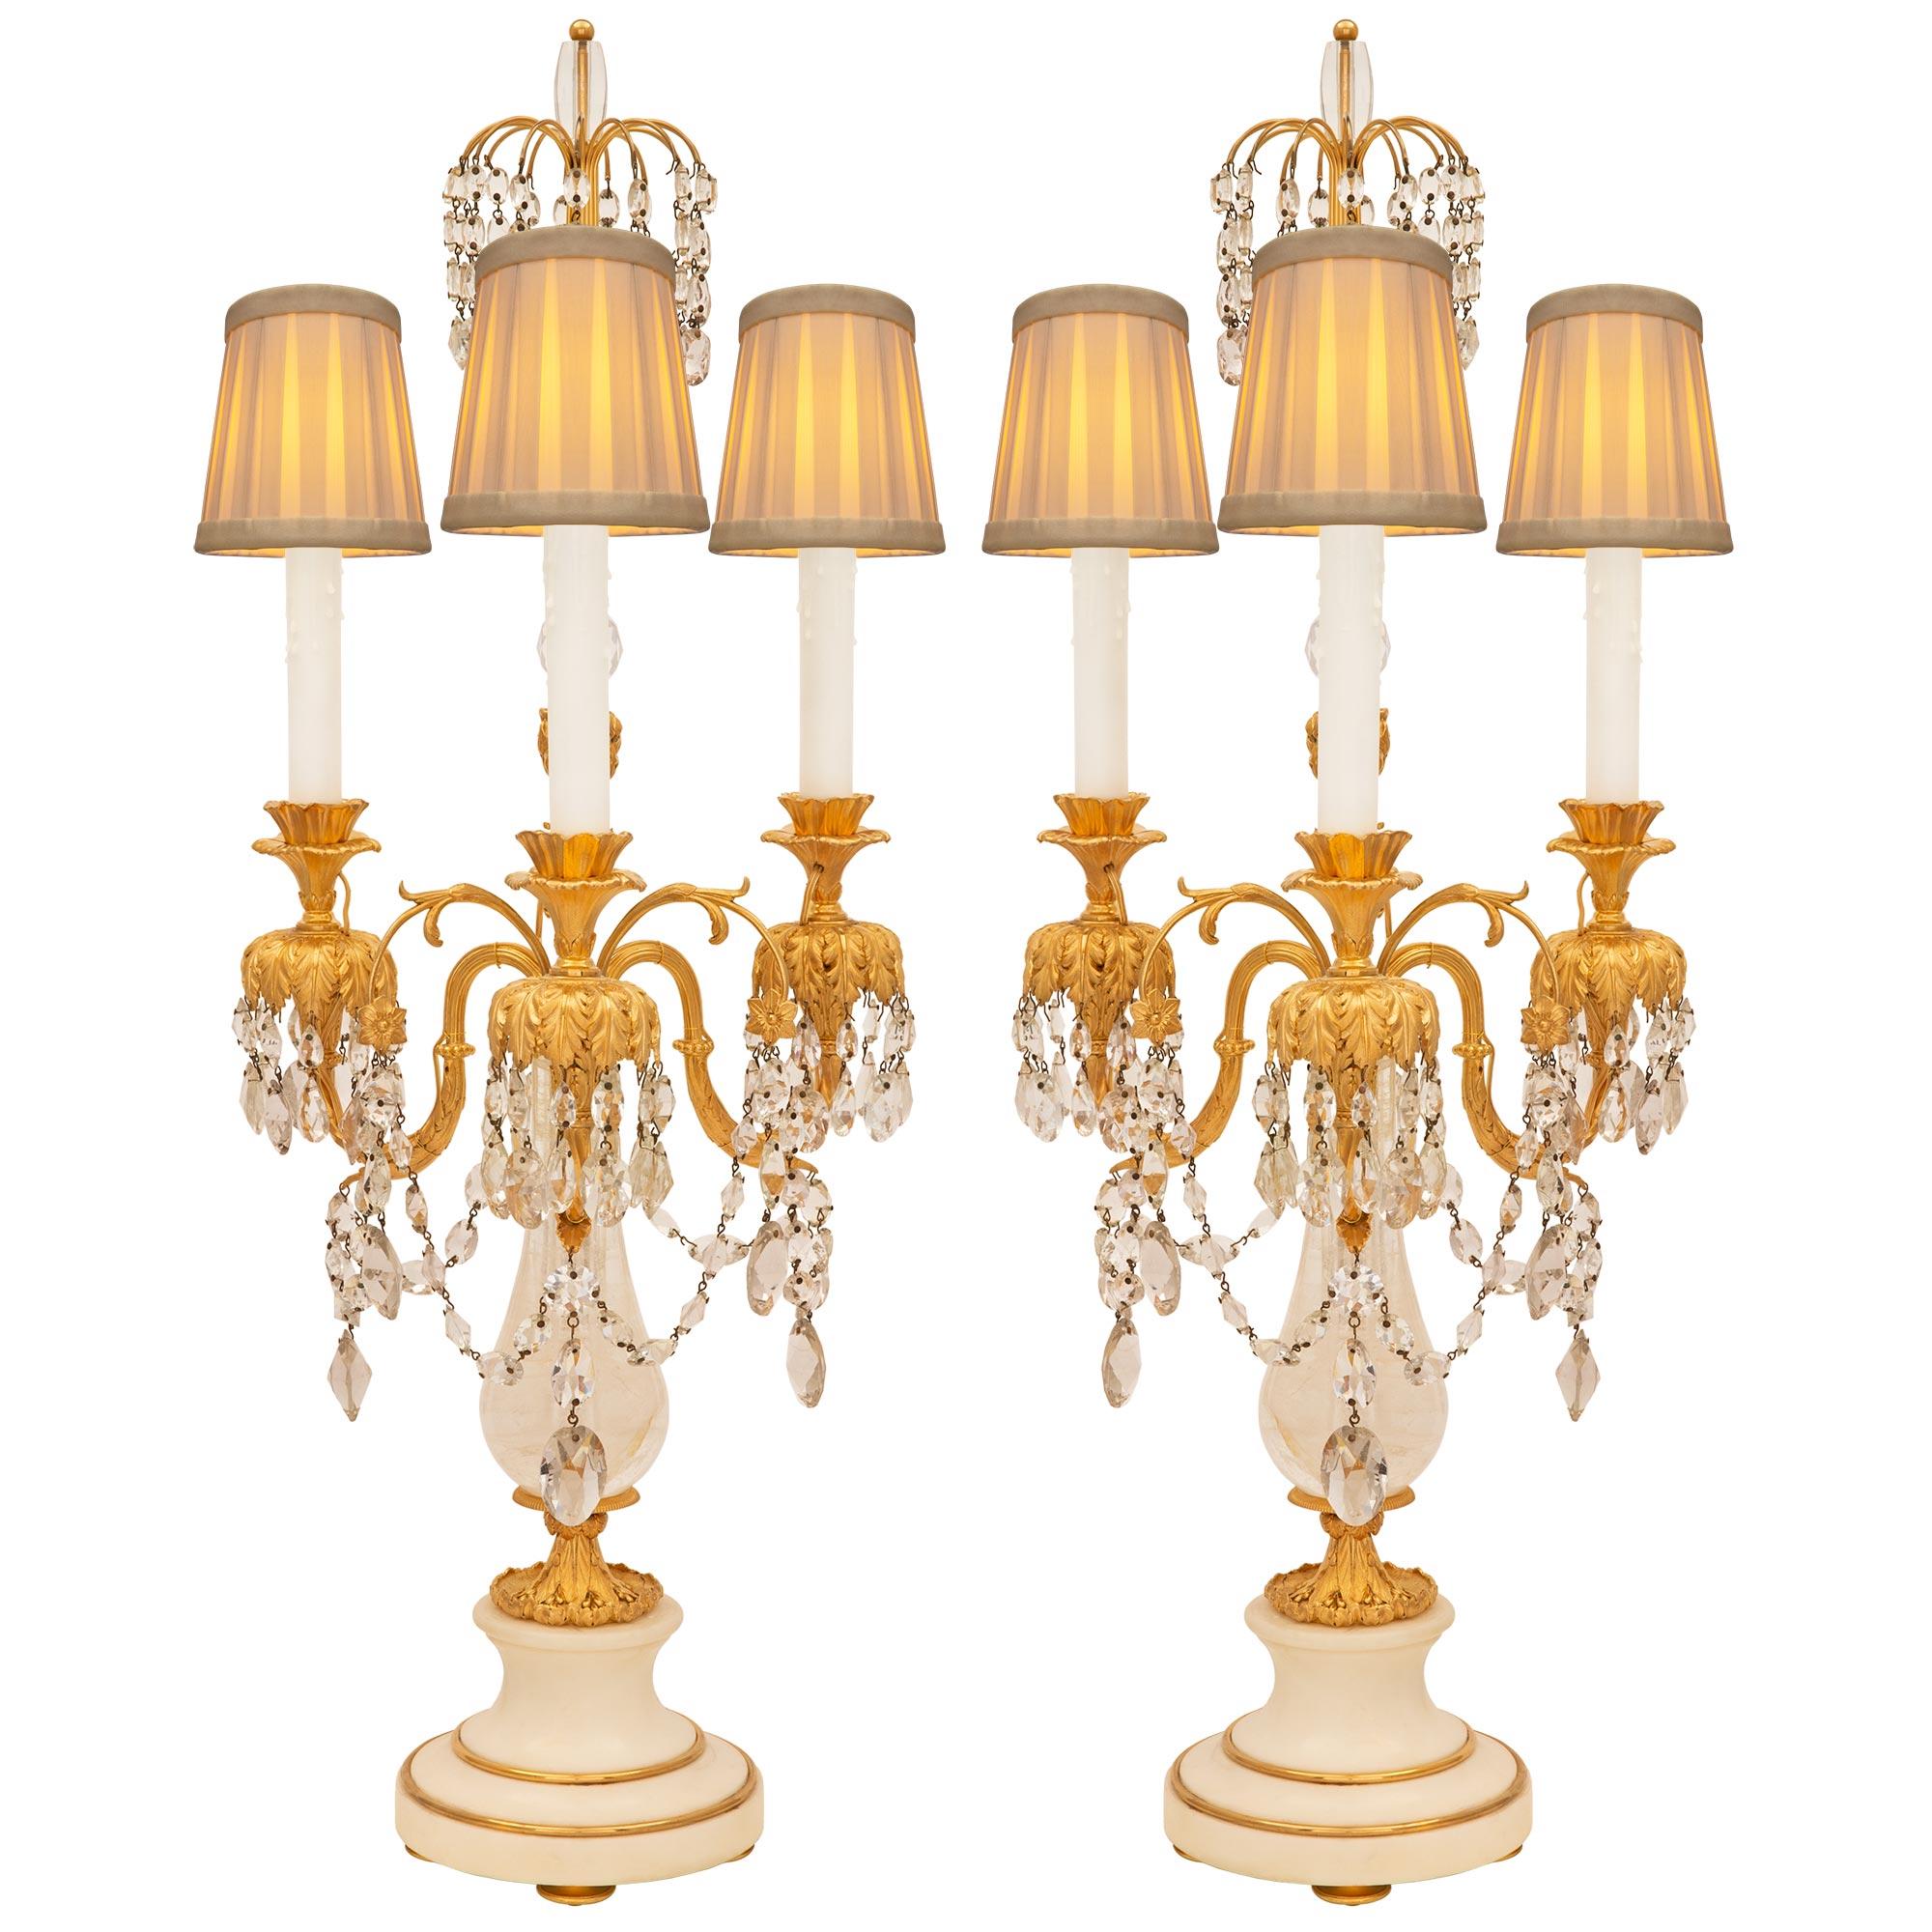 A stunning and extremely decorative Russian 19th century Neo-Classical st. white Carrara marble, rock crystal, crystal, and ormolu candelabra lamps. Each three arm lamp is raised by an elegant circular white Carrara marble base with a mottled